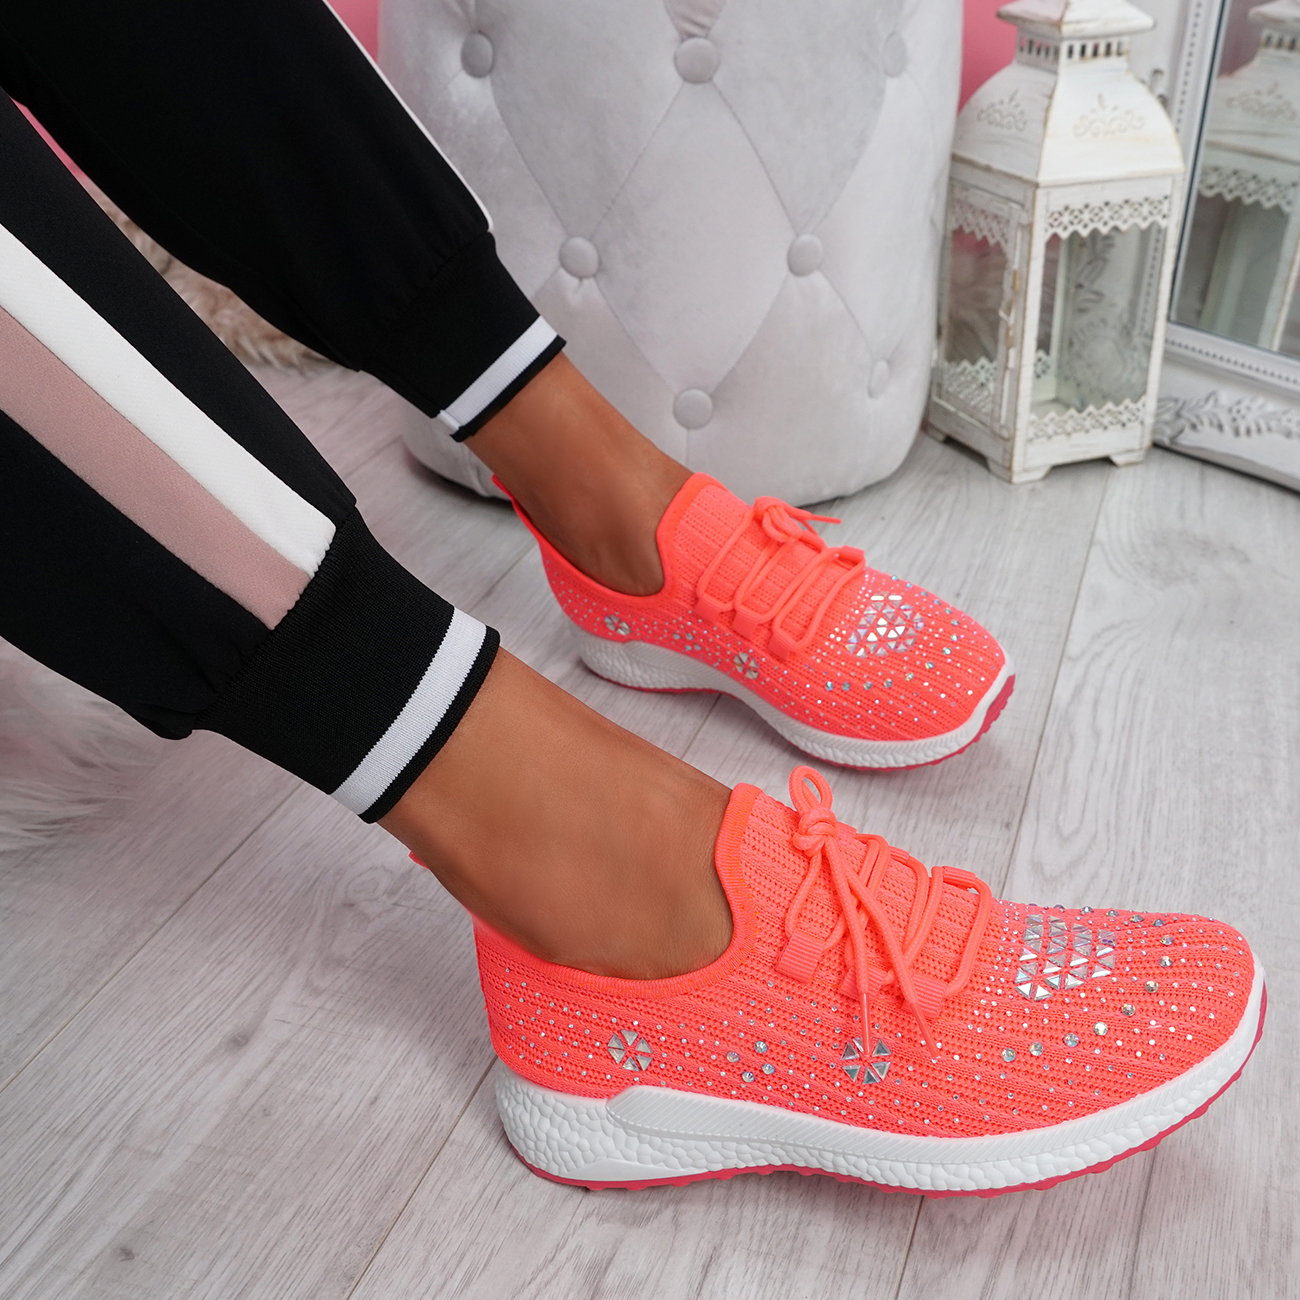 WOMENS LADIES KNIT DIAMANTE STUDDED SPORT TRAINERS SNEAKERS PARTY WOMEN ...